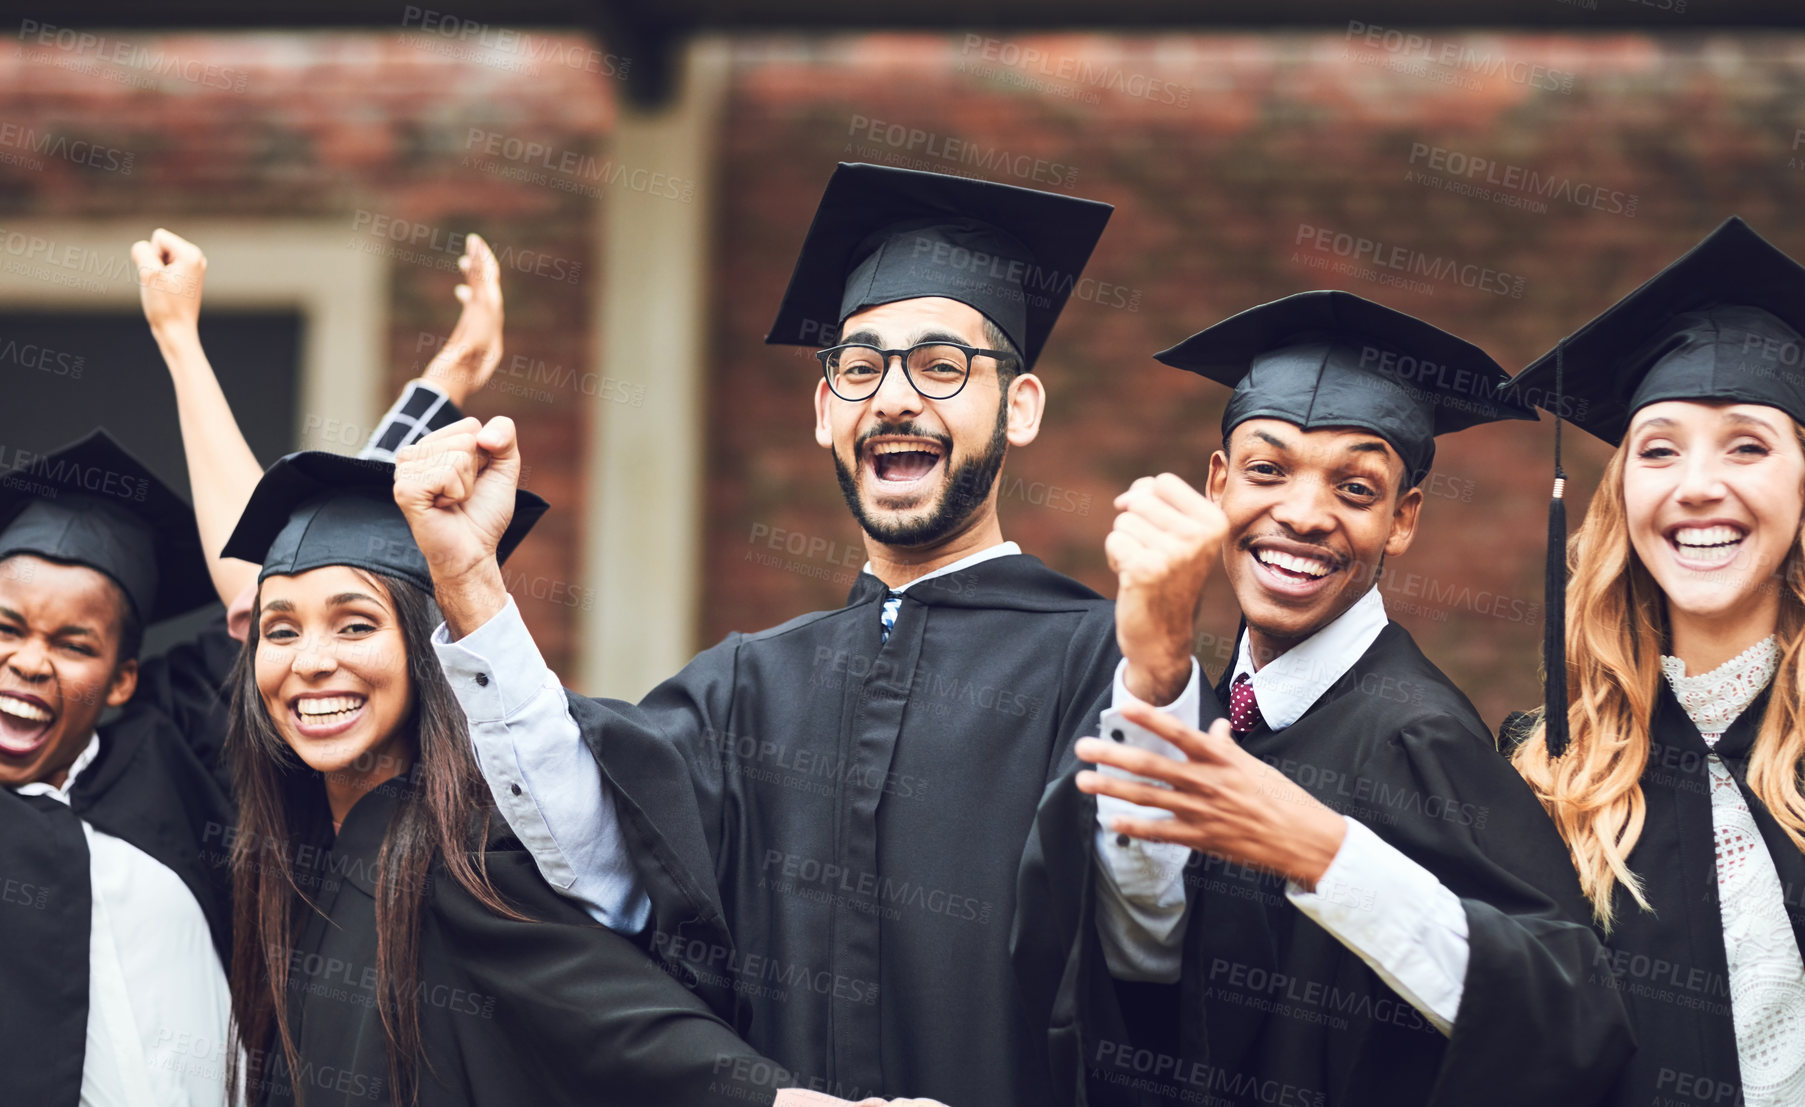 Buy stock photo Shot of a group of fellow students standing together on graduation day